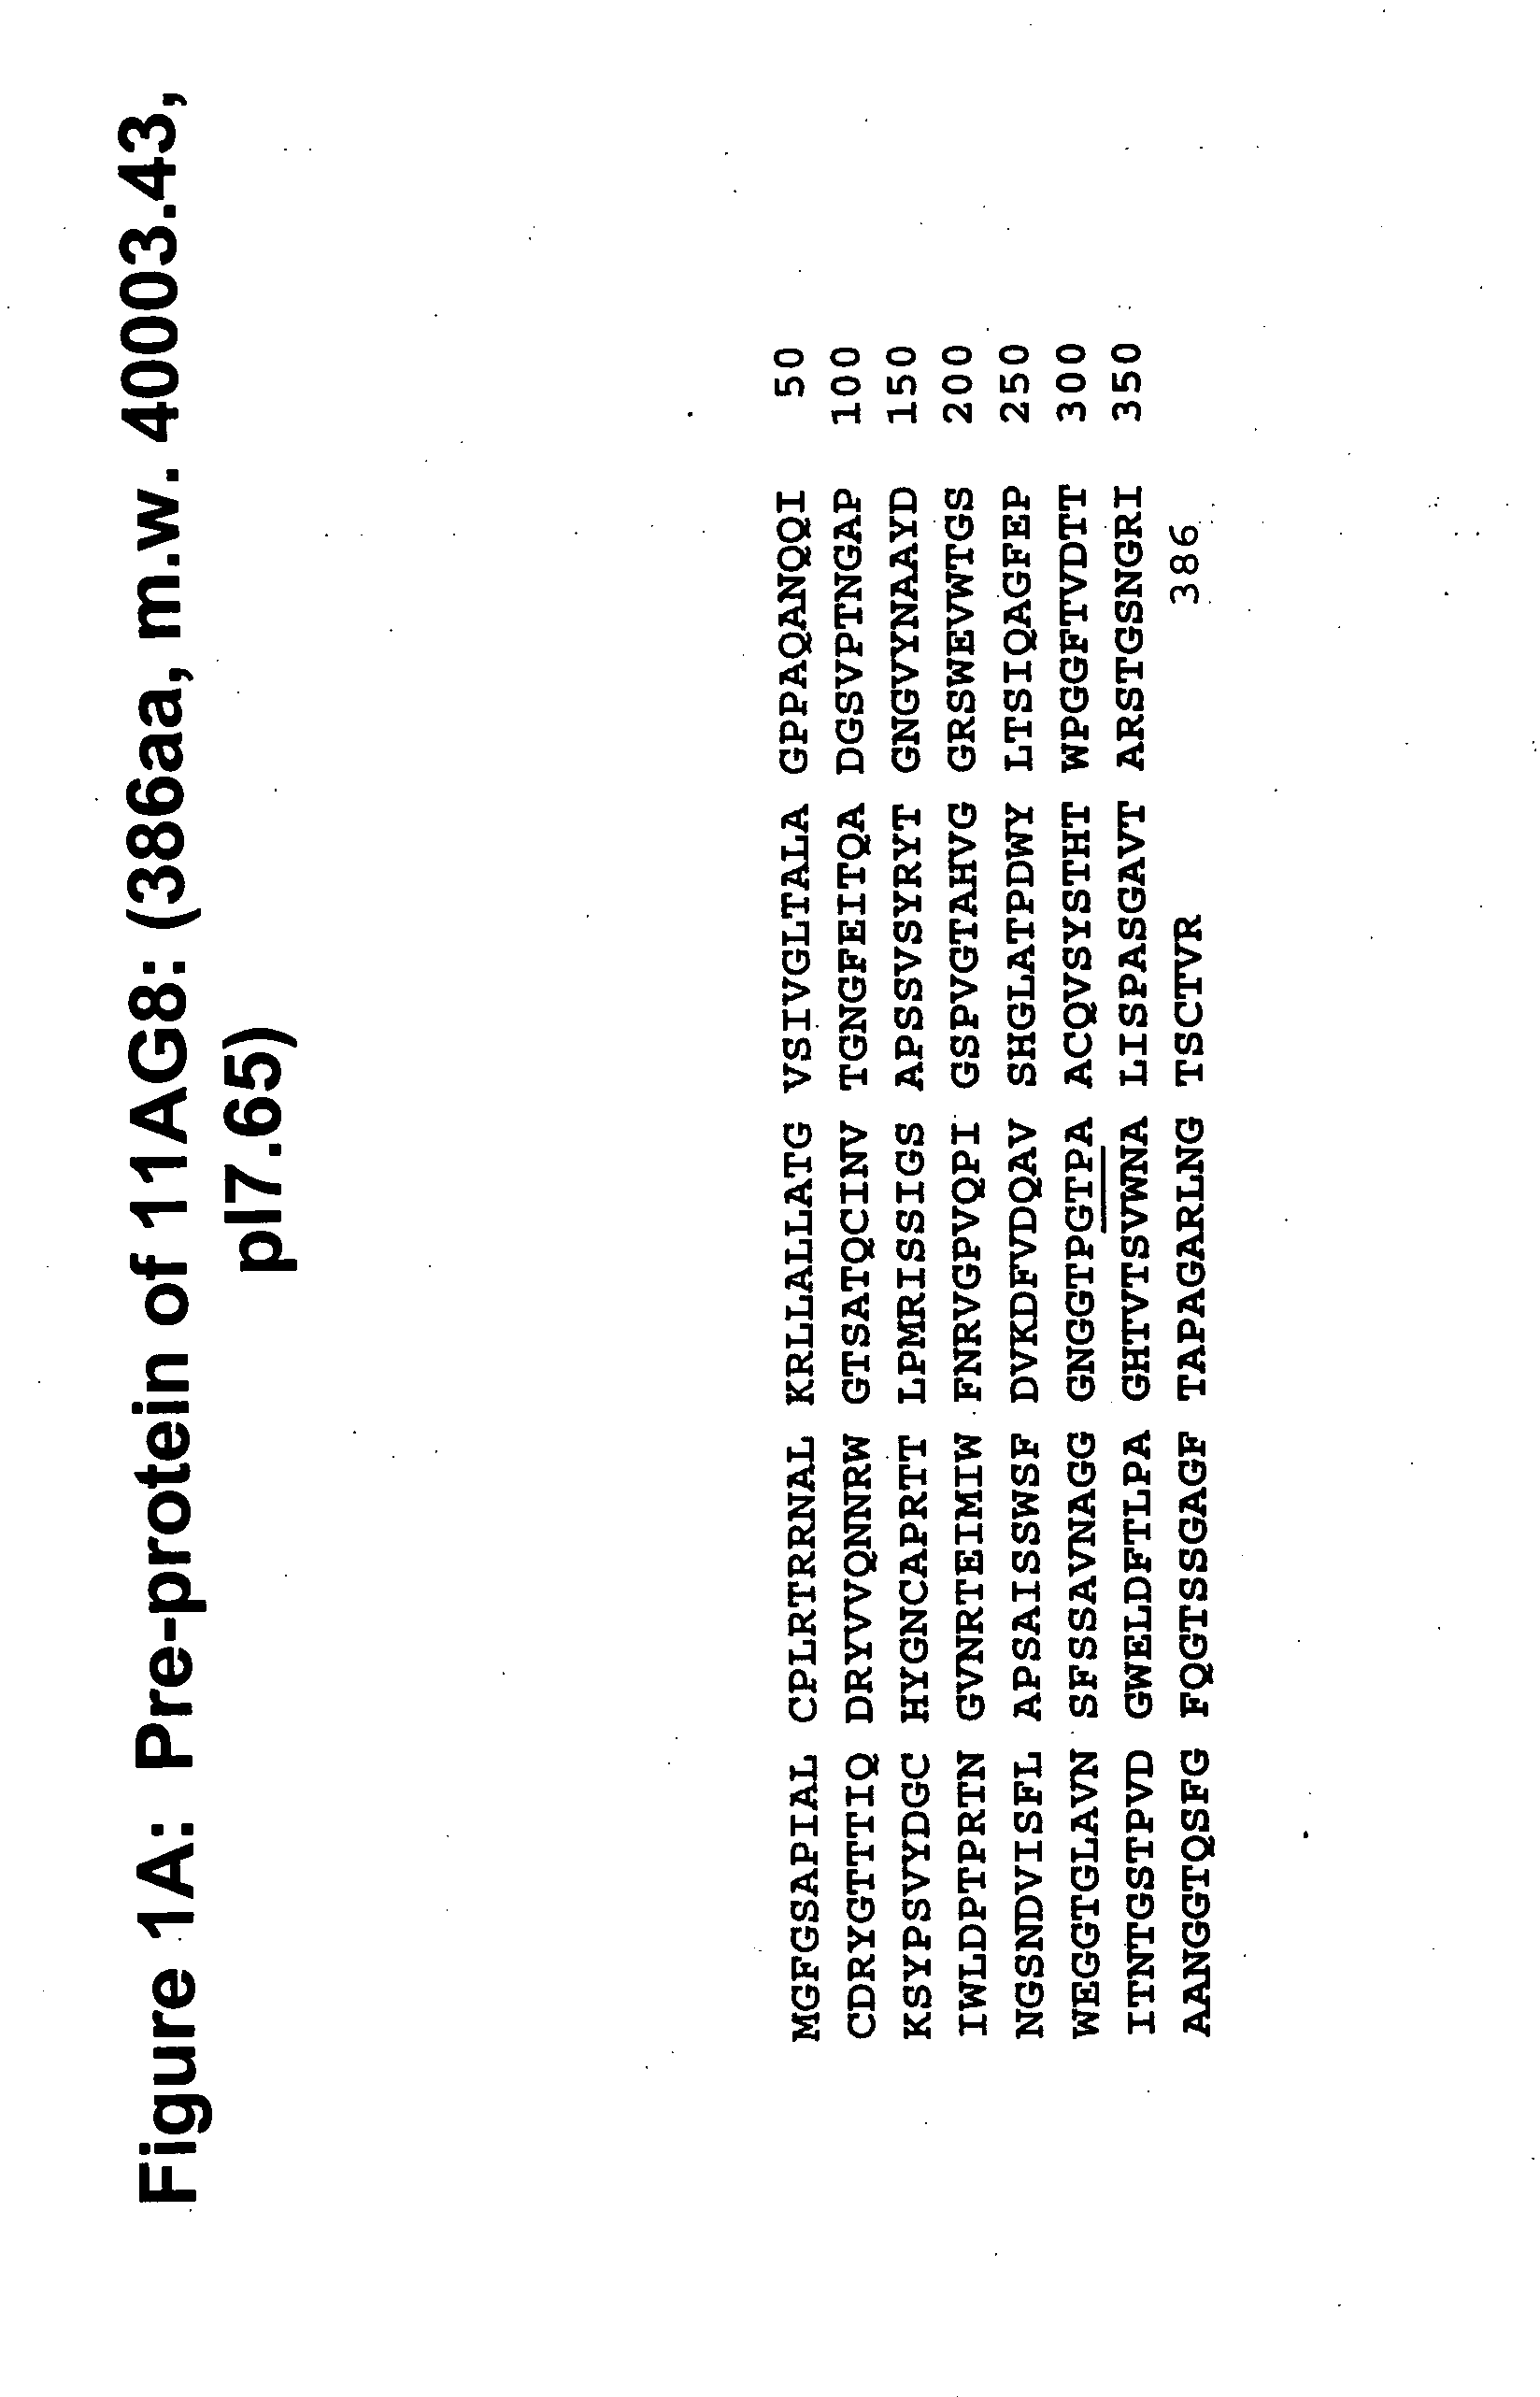 Neutral cellulase catalytic core and method of producing same